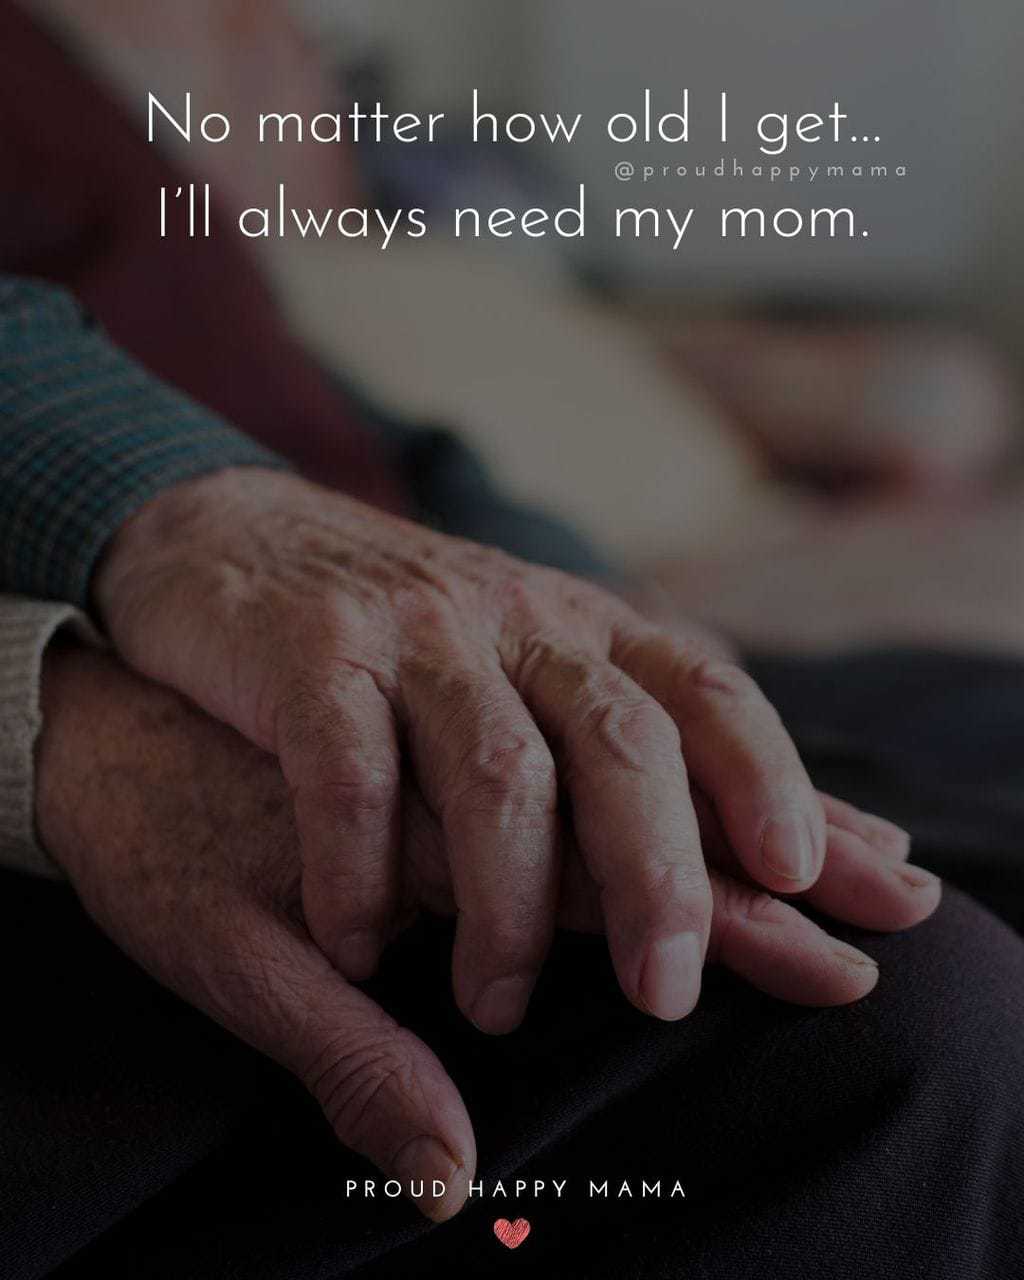 Elderly parents holding hands with missing mother quote text overlay. 'No matter how old I get…I’ll always need my mom.’